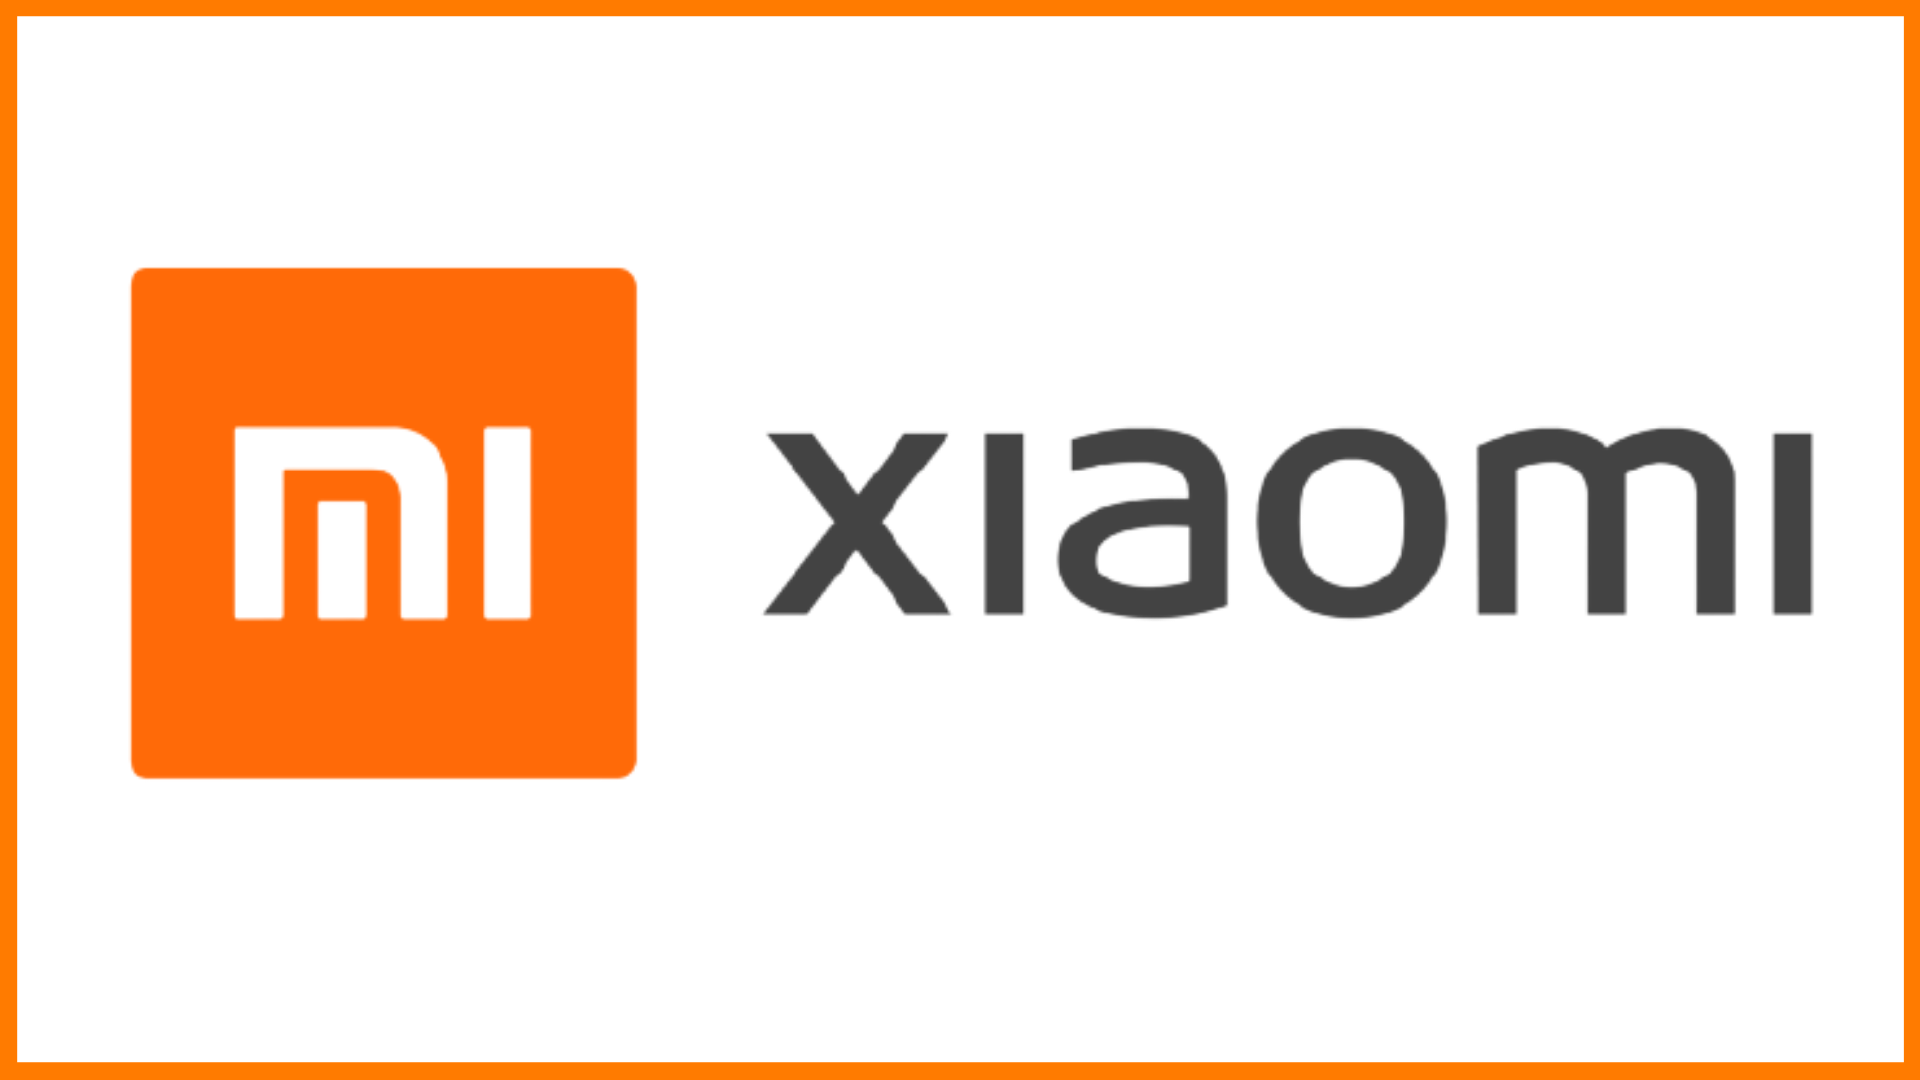 Chinese Smartphone Maker Xiaomi Records a Stellar Q2, Surpasses Apple to Become the World’s Second Largest Smartphone Vendor